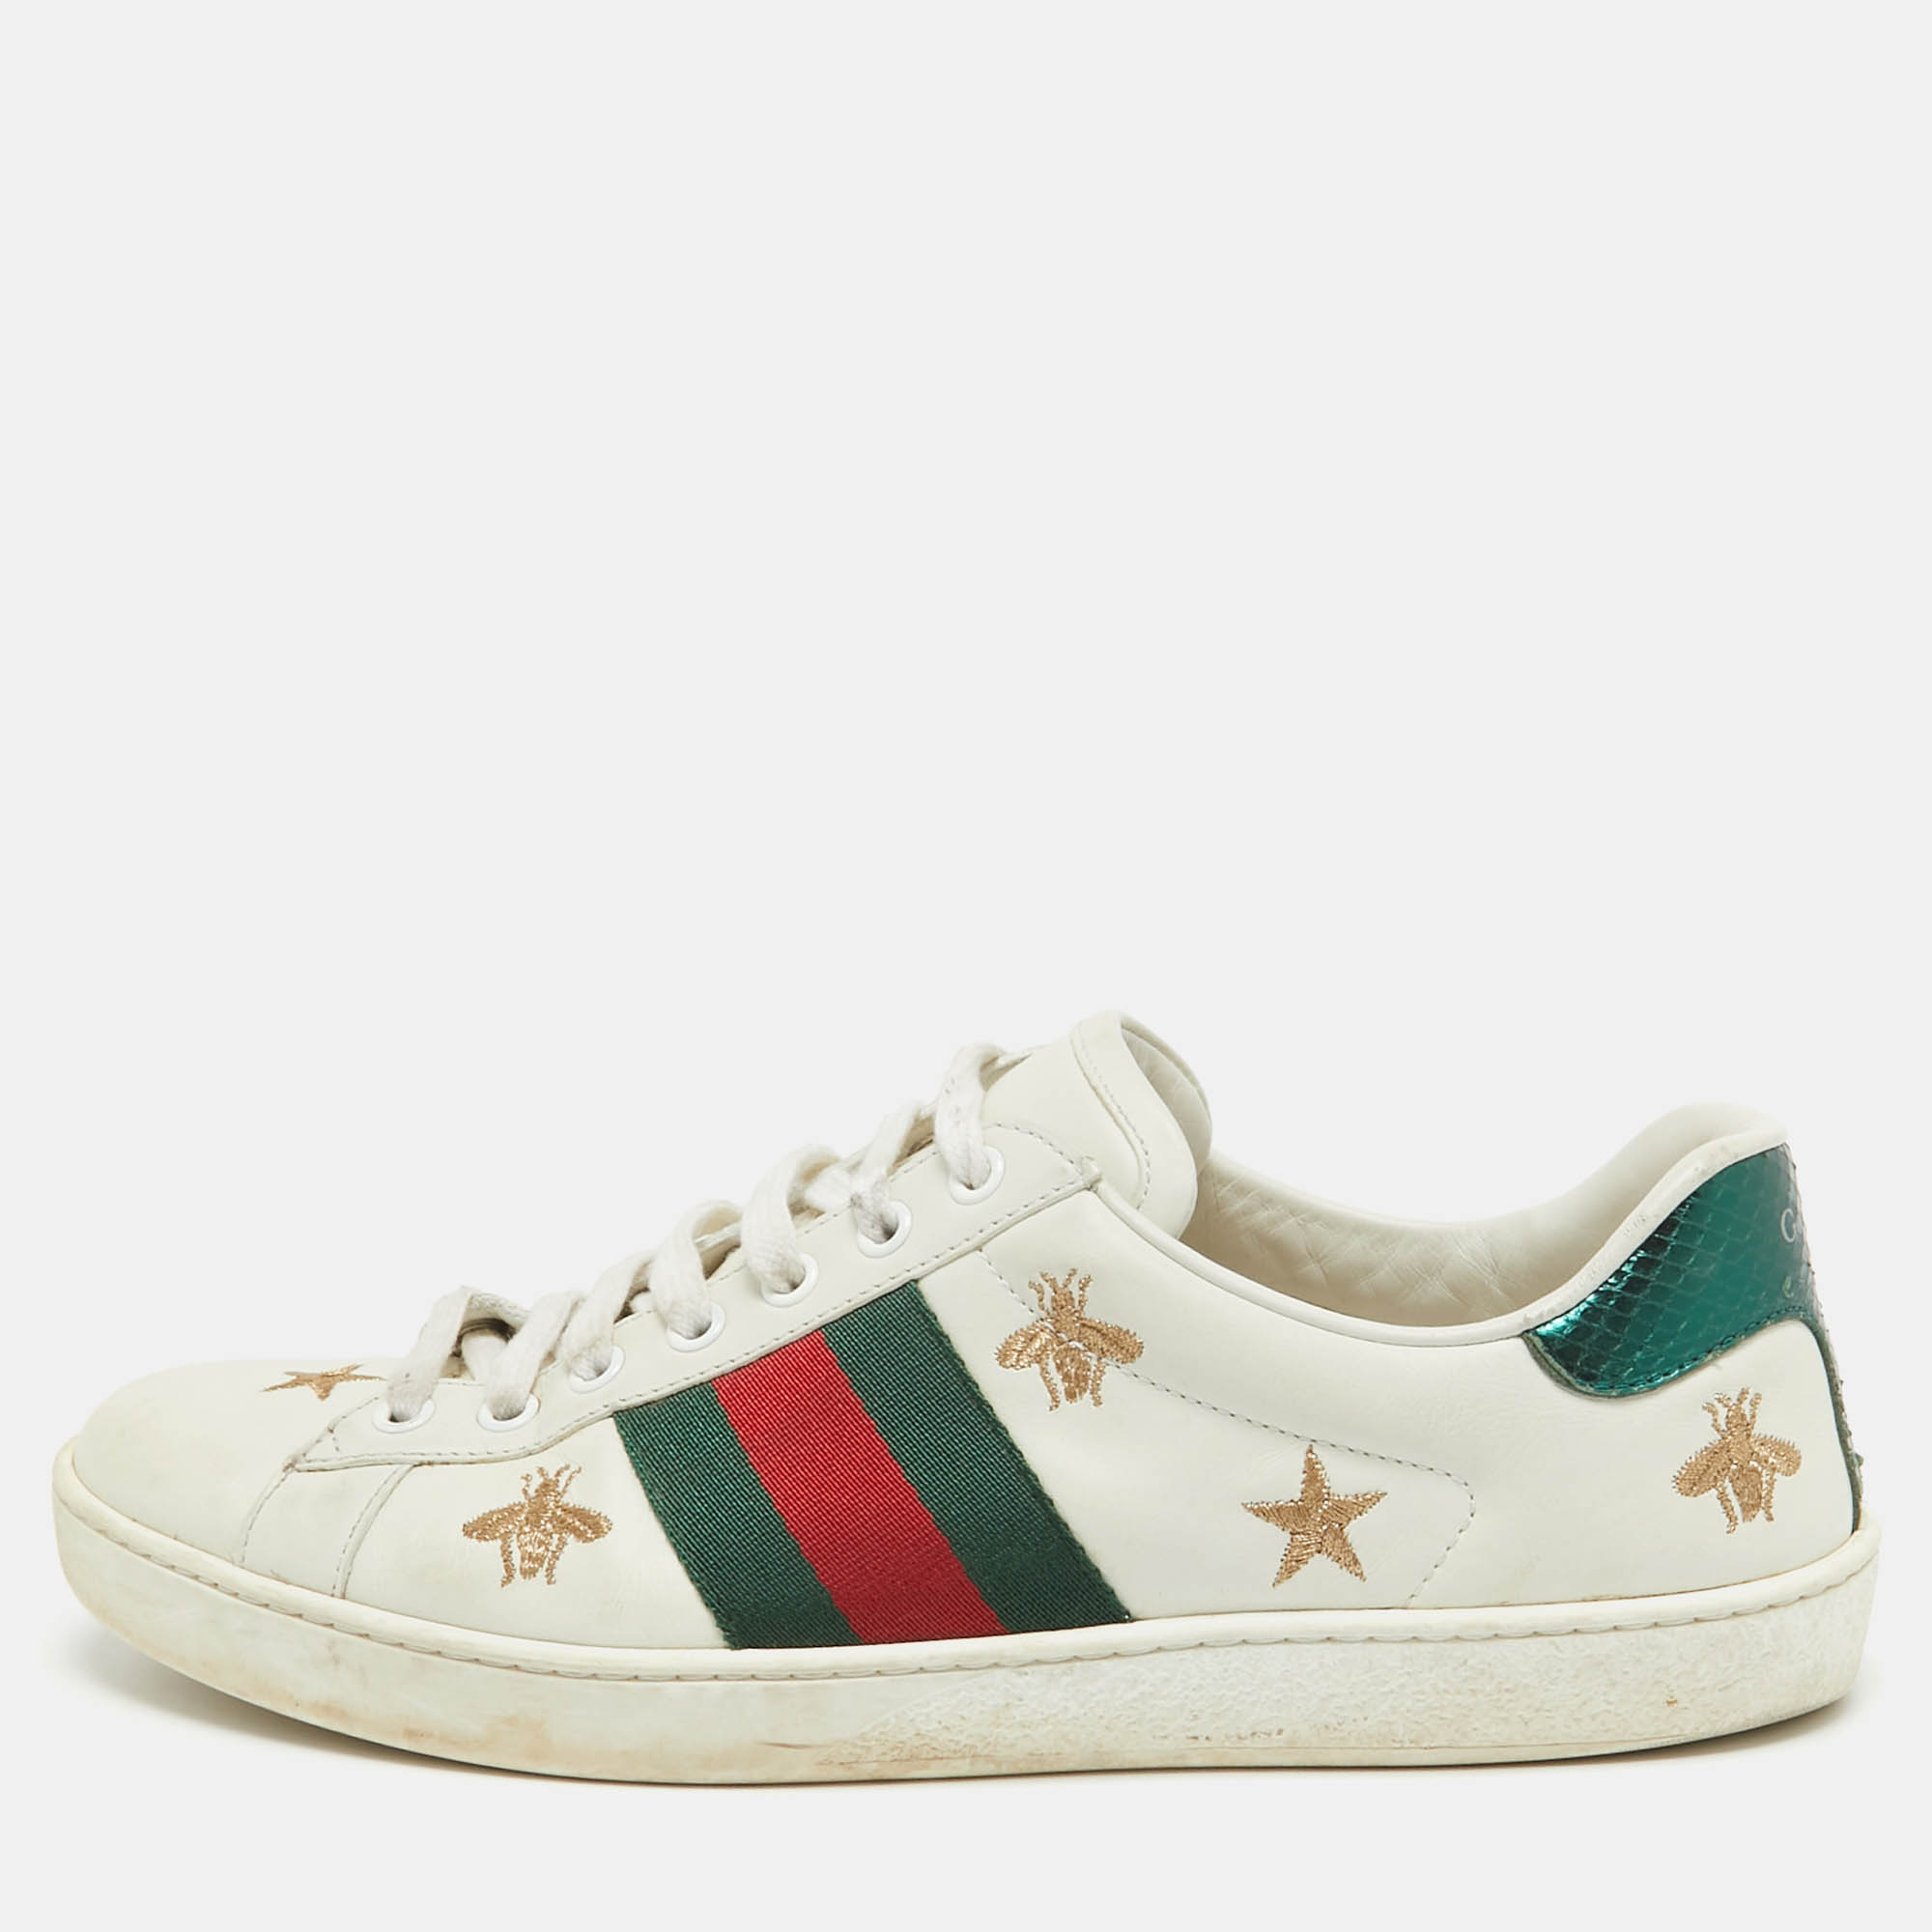 Pre-owned Gucci White Leather Ace Web Bee Embroidered Low Top Sneakers Size 41